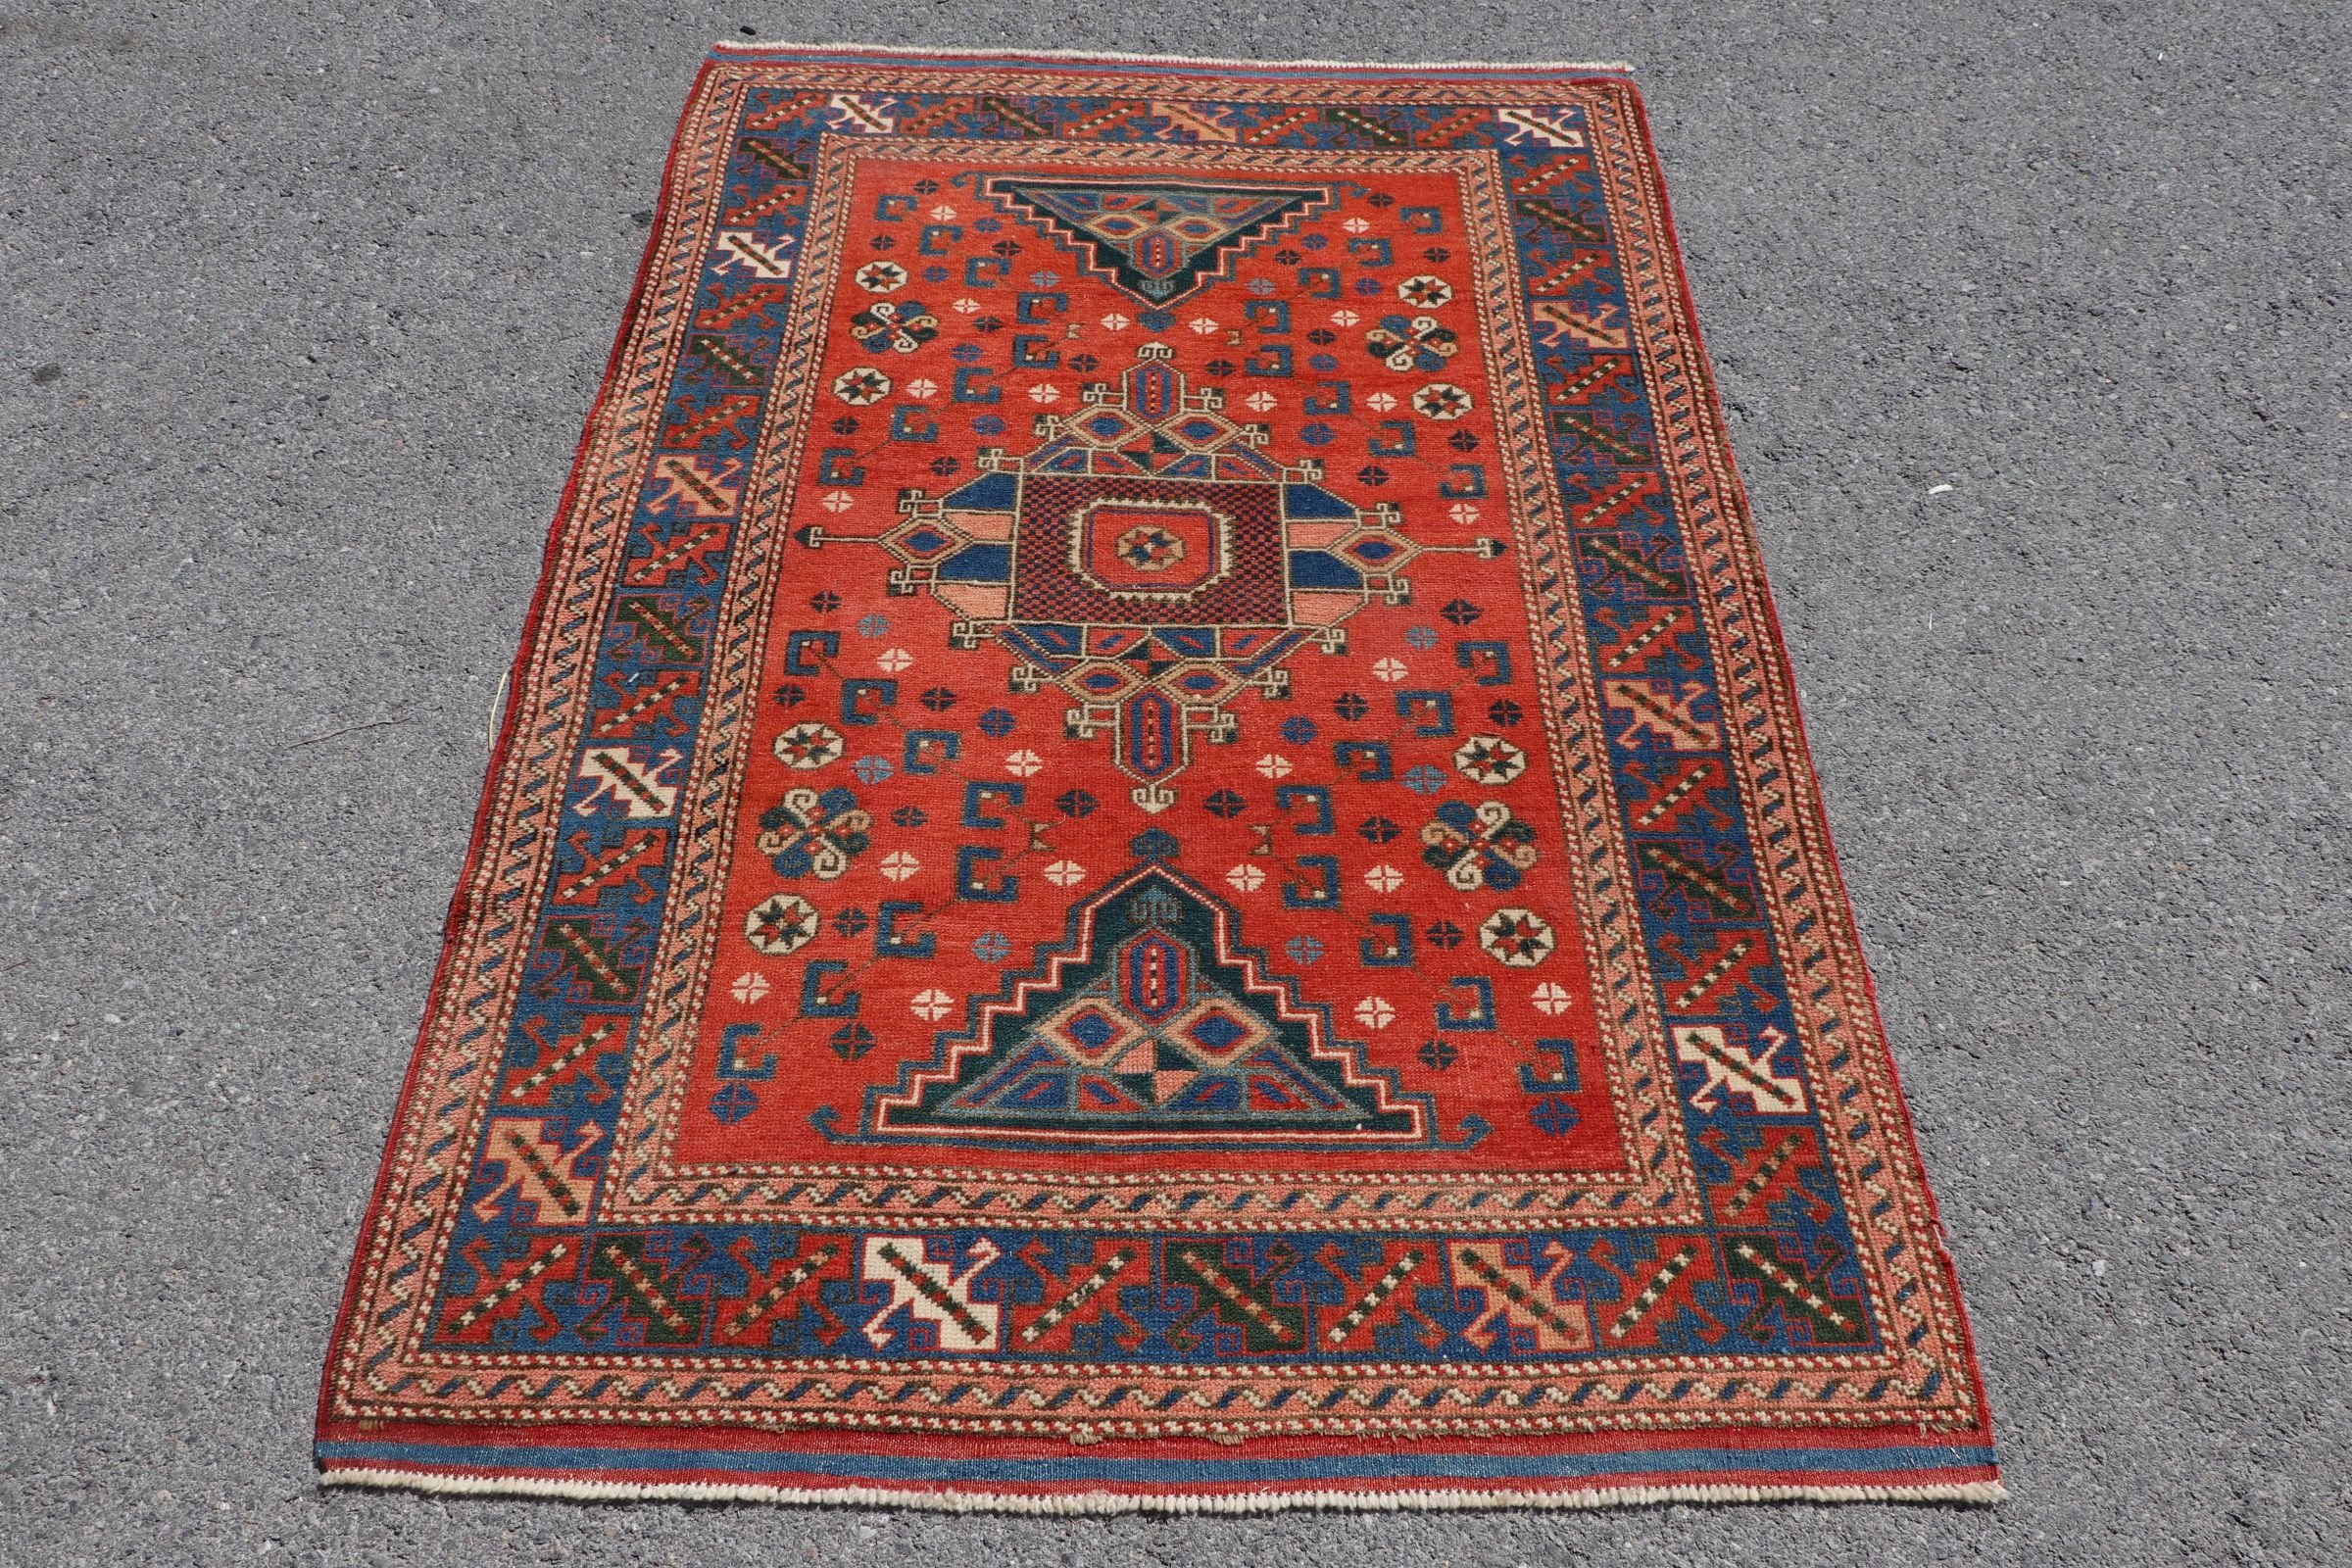 3.8x5.6 ft Accent Rug, Oushak Rugs, Rugs for Kitchen, Red Oushak Rugs, Turkish Rug, Floor Rugs, Kitchen Rug, Vintage Rugs, Entry Rug